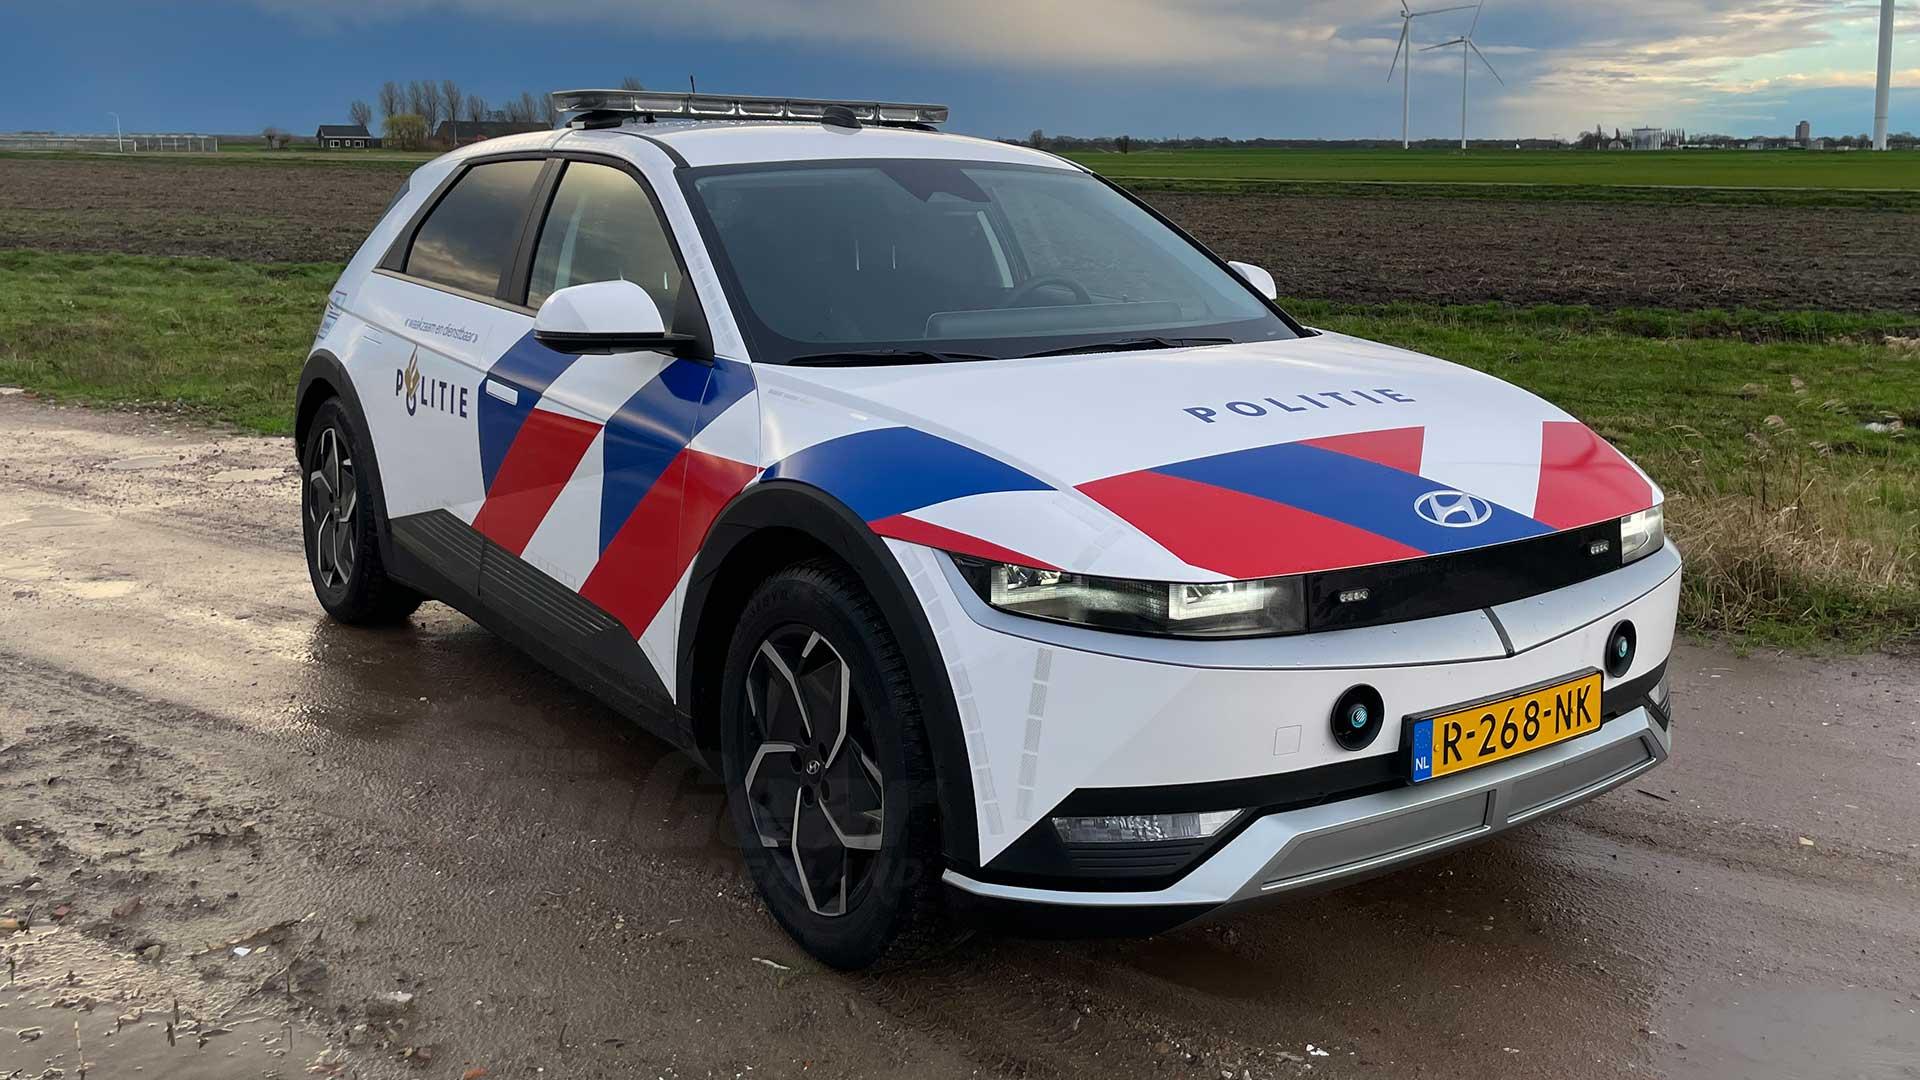 Hyundai Ioniq 5 as an electric police car in the Netherlands